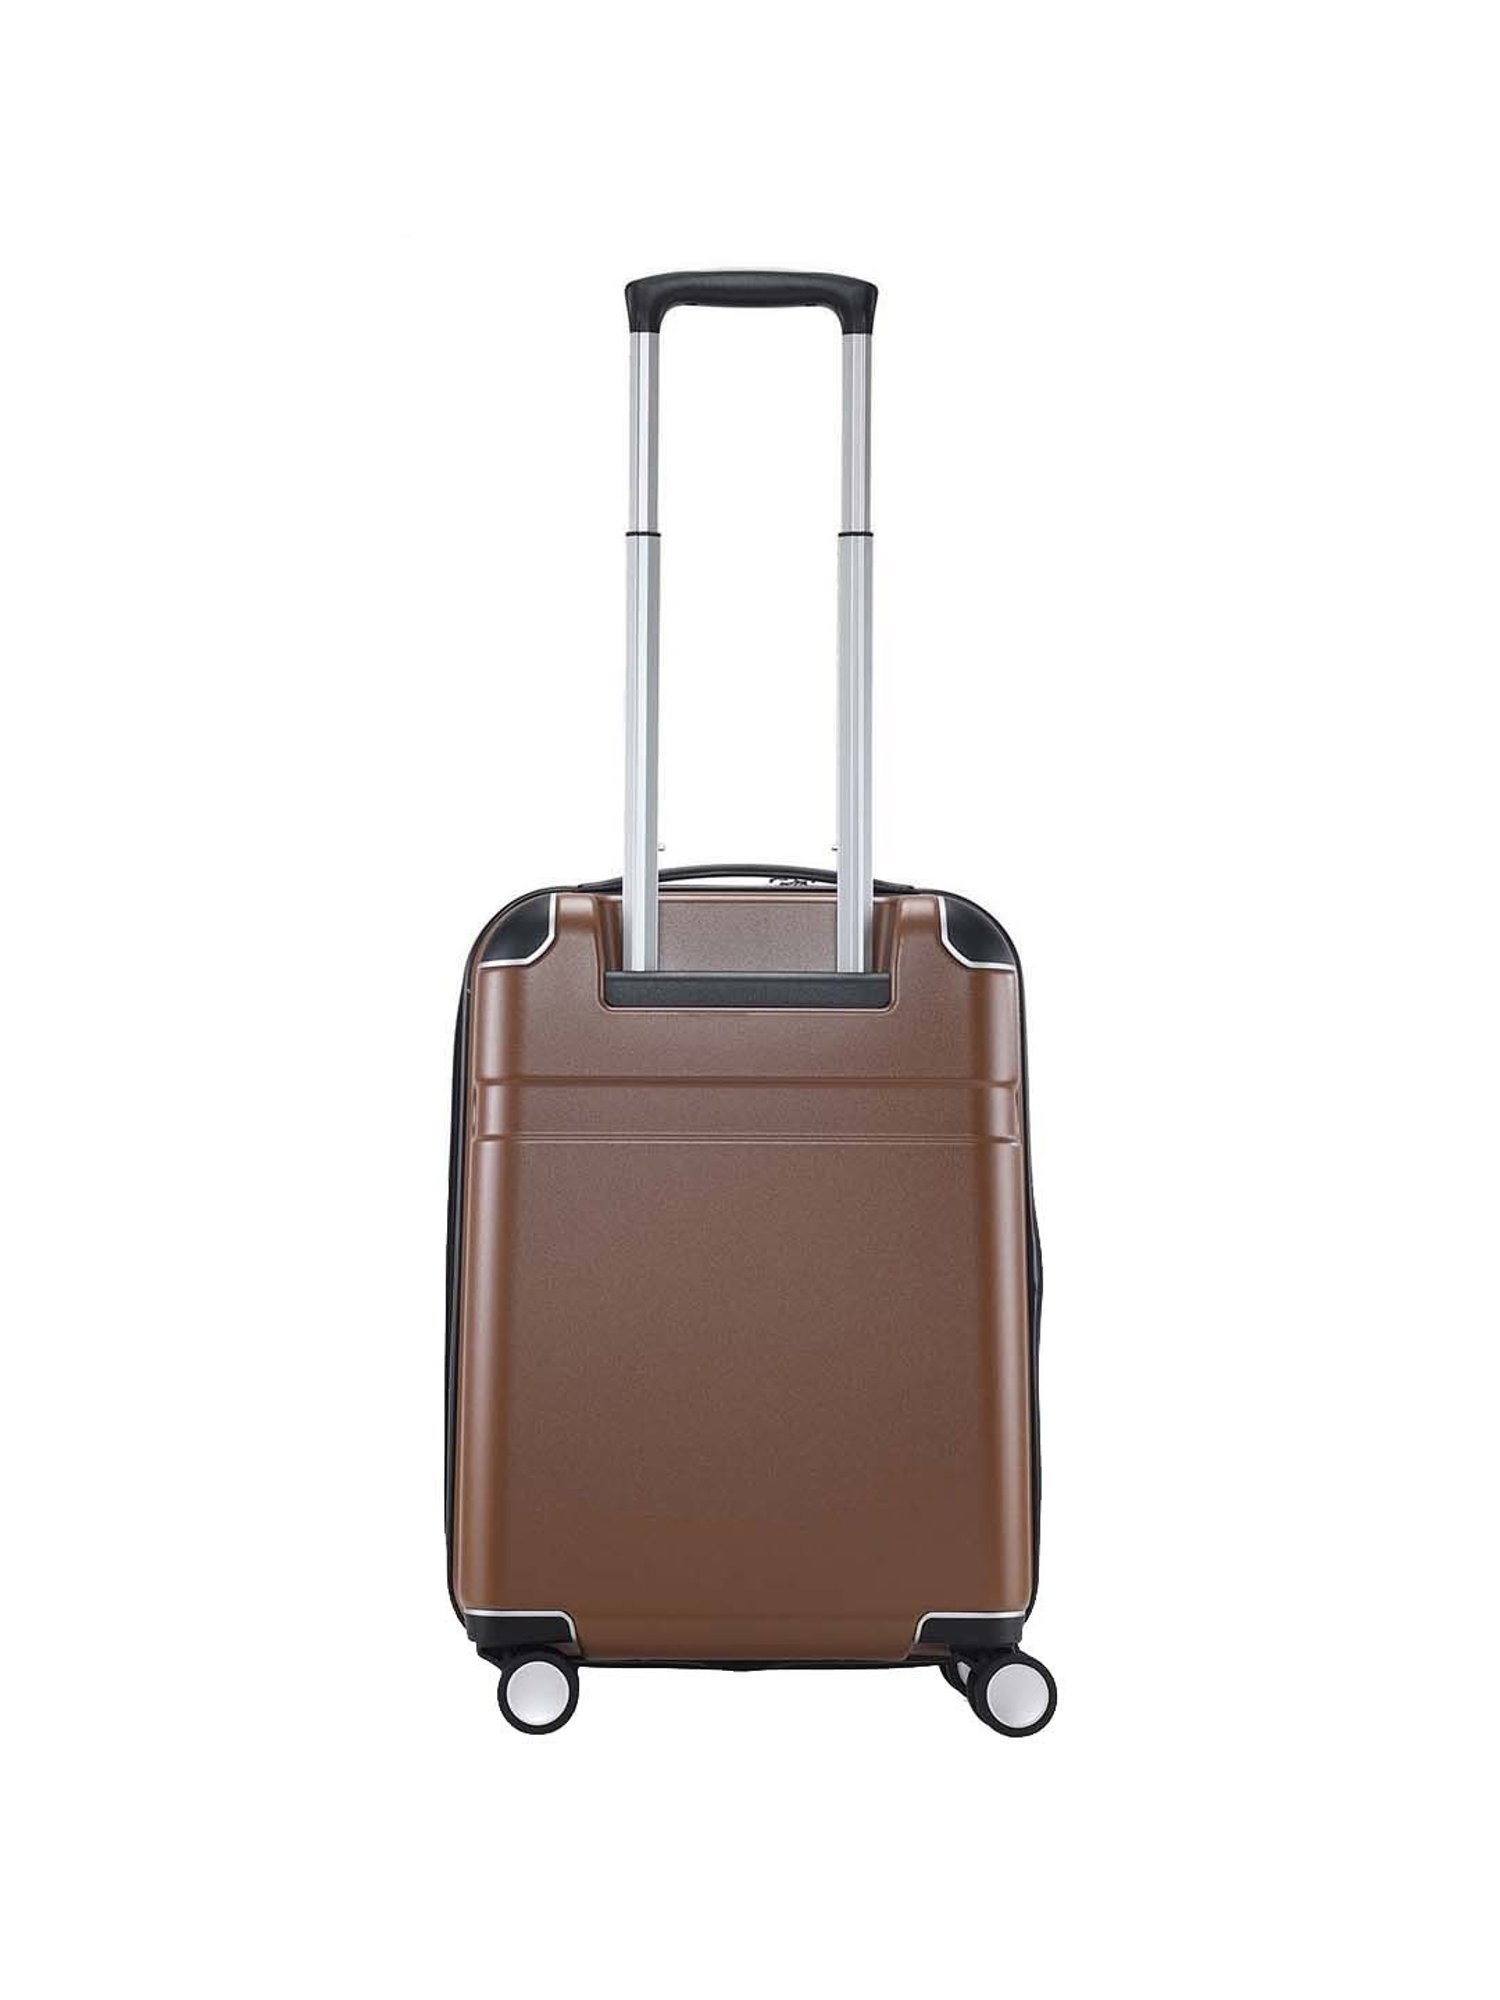 Sonada Upright Luggage Expandable Hardside Suitcase Check In Champagne –  The Bag House®™